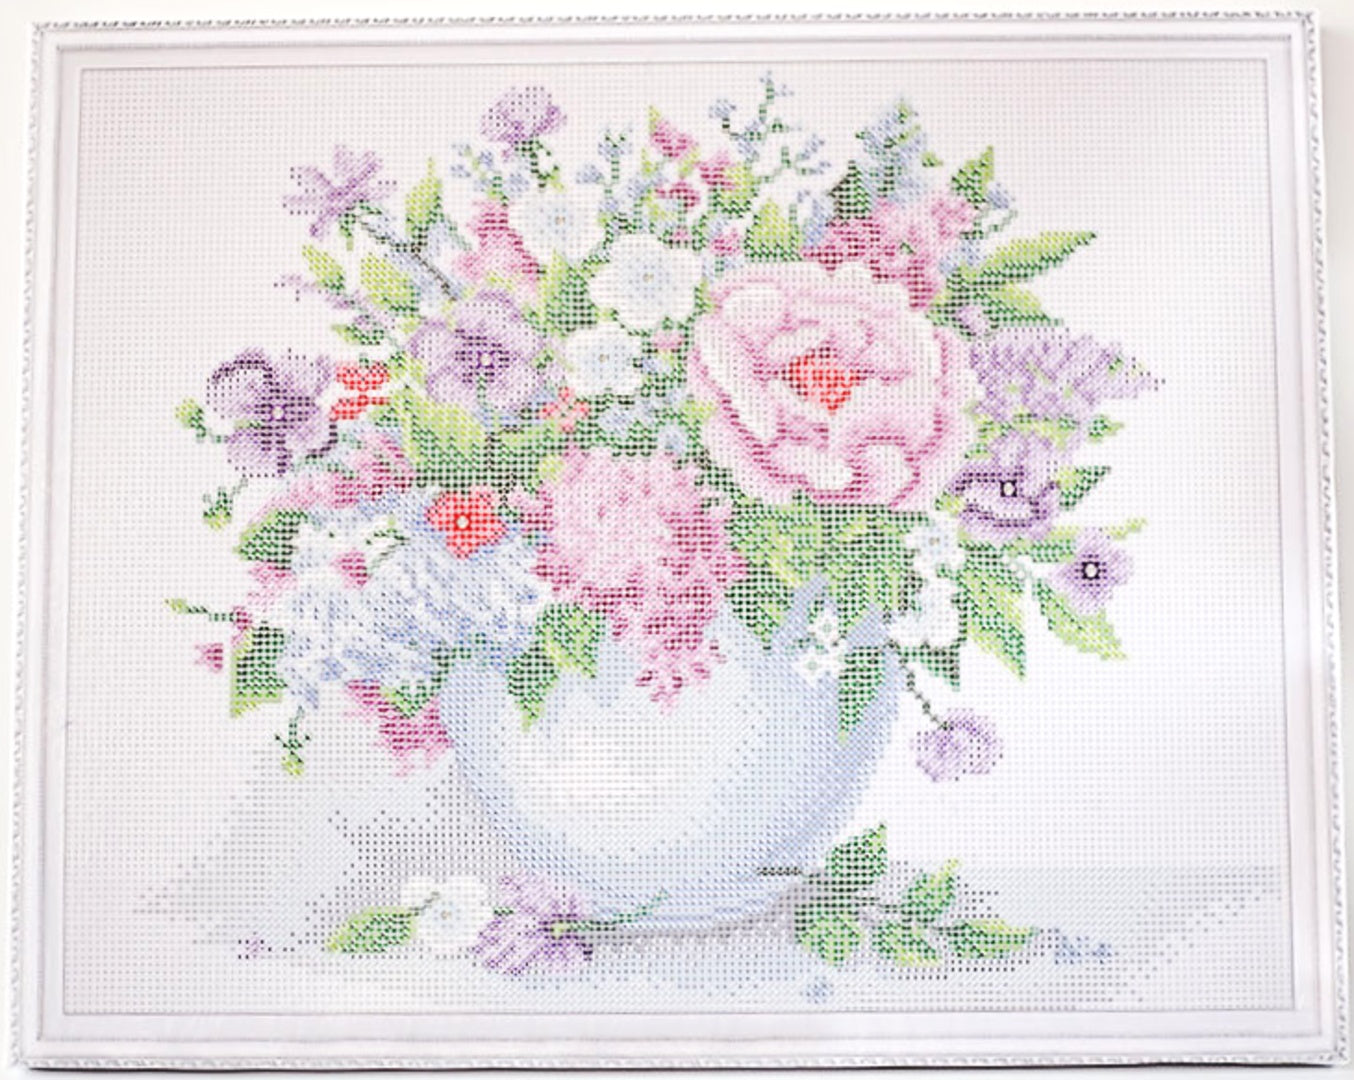 Diamond painting - LG147e - Delicate flowers in a white vase Image 6